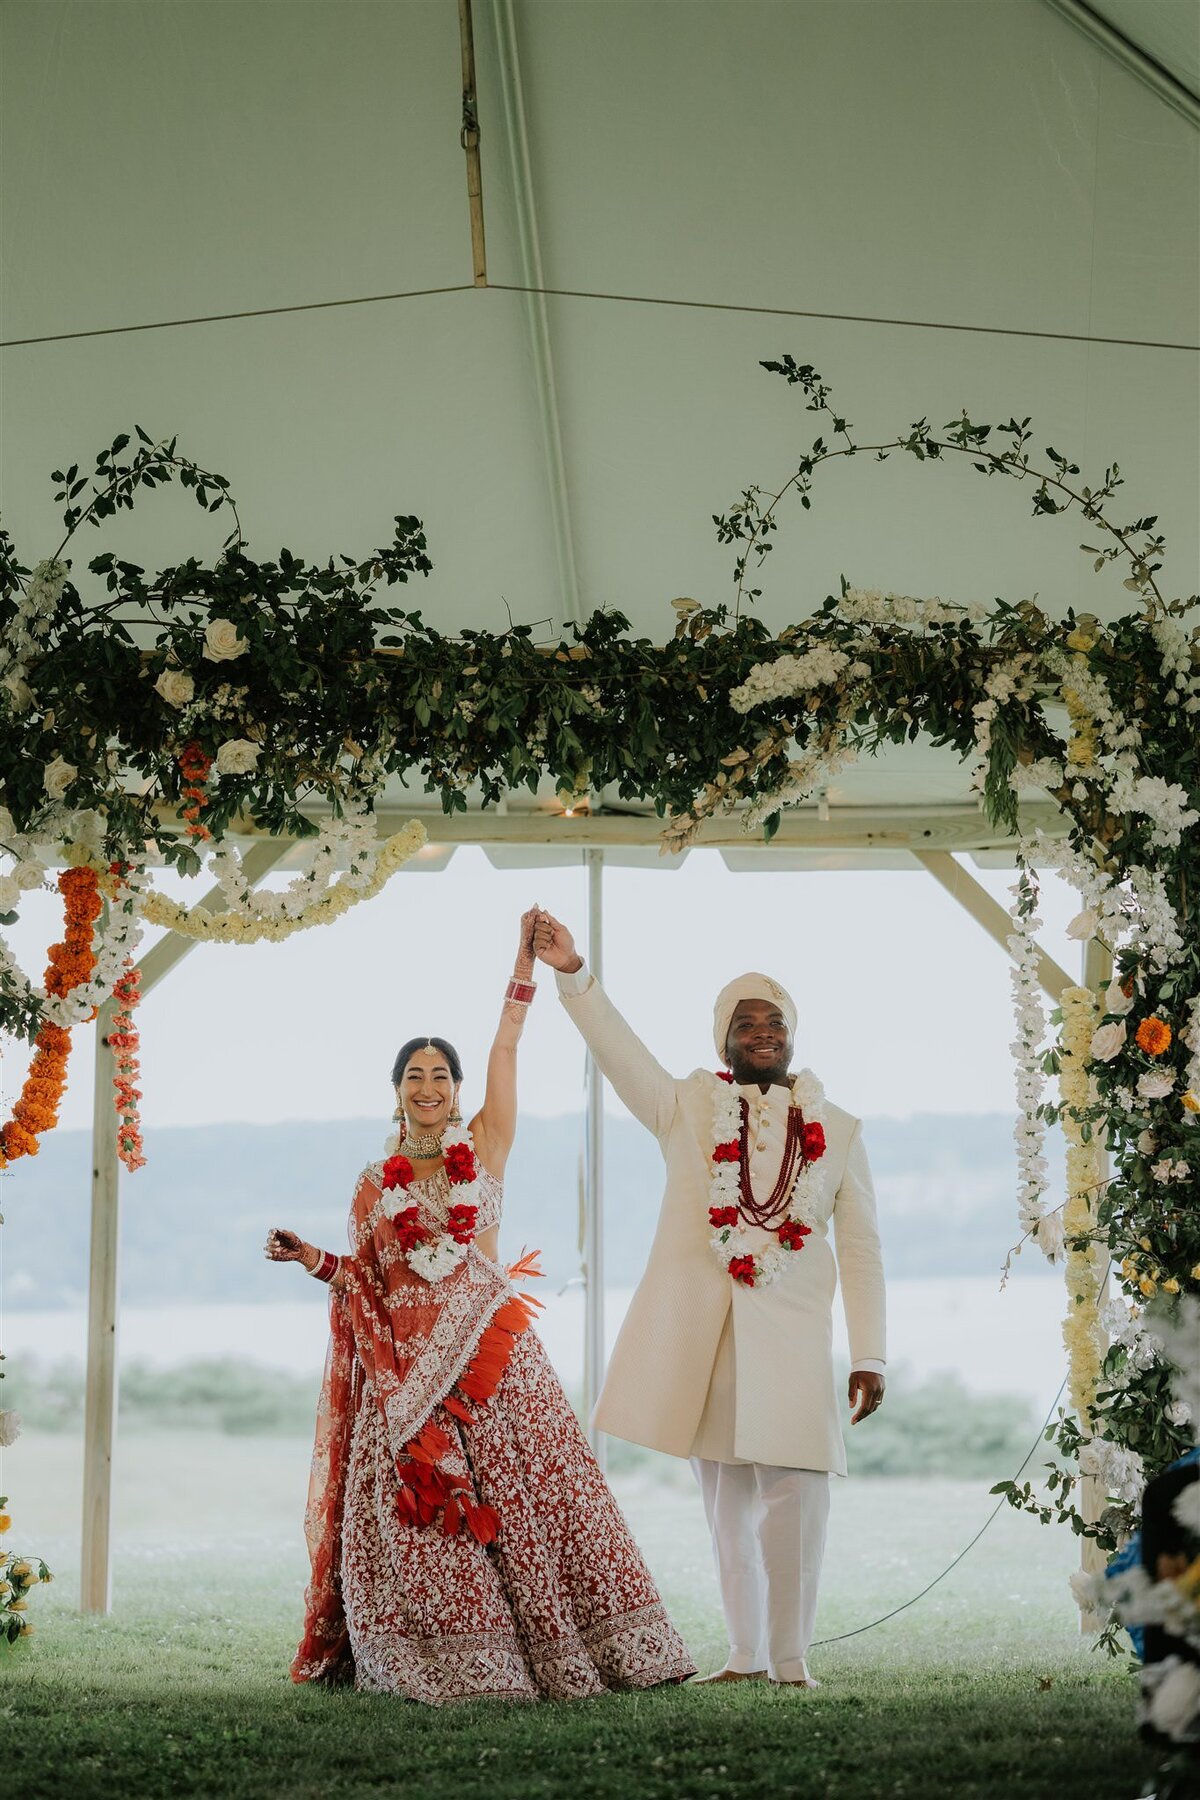 Indian Ceremony under a Mandap with greenery and flowers at Ankony Carriage House in the Hudson Valley